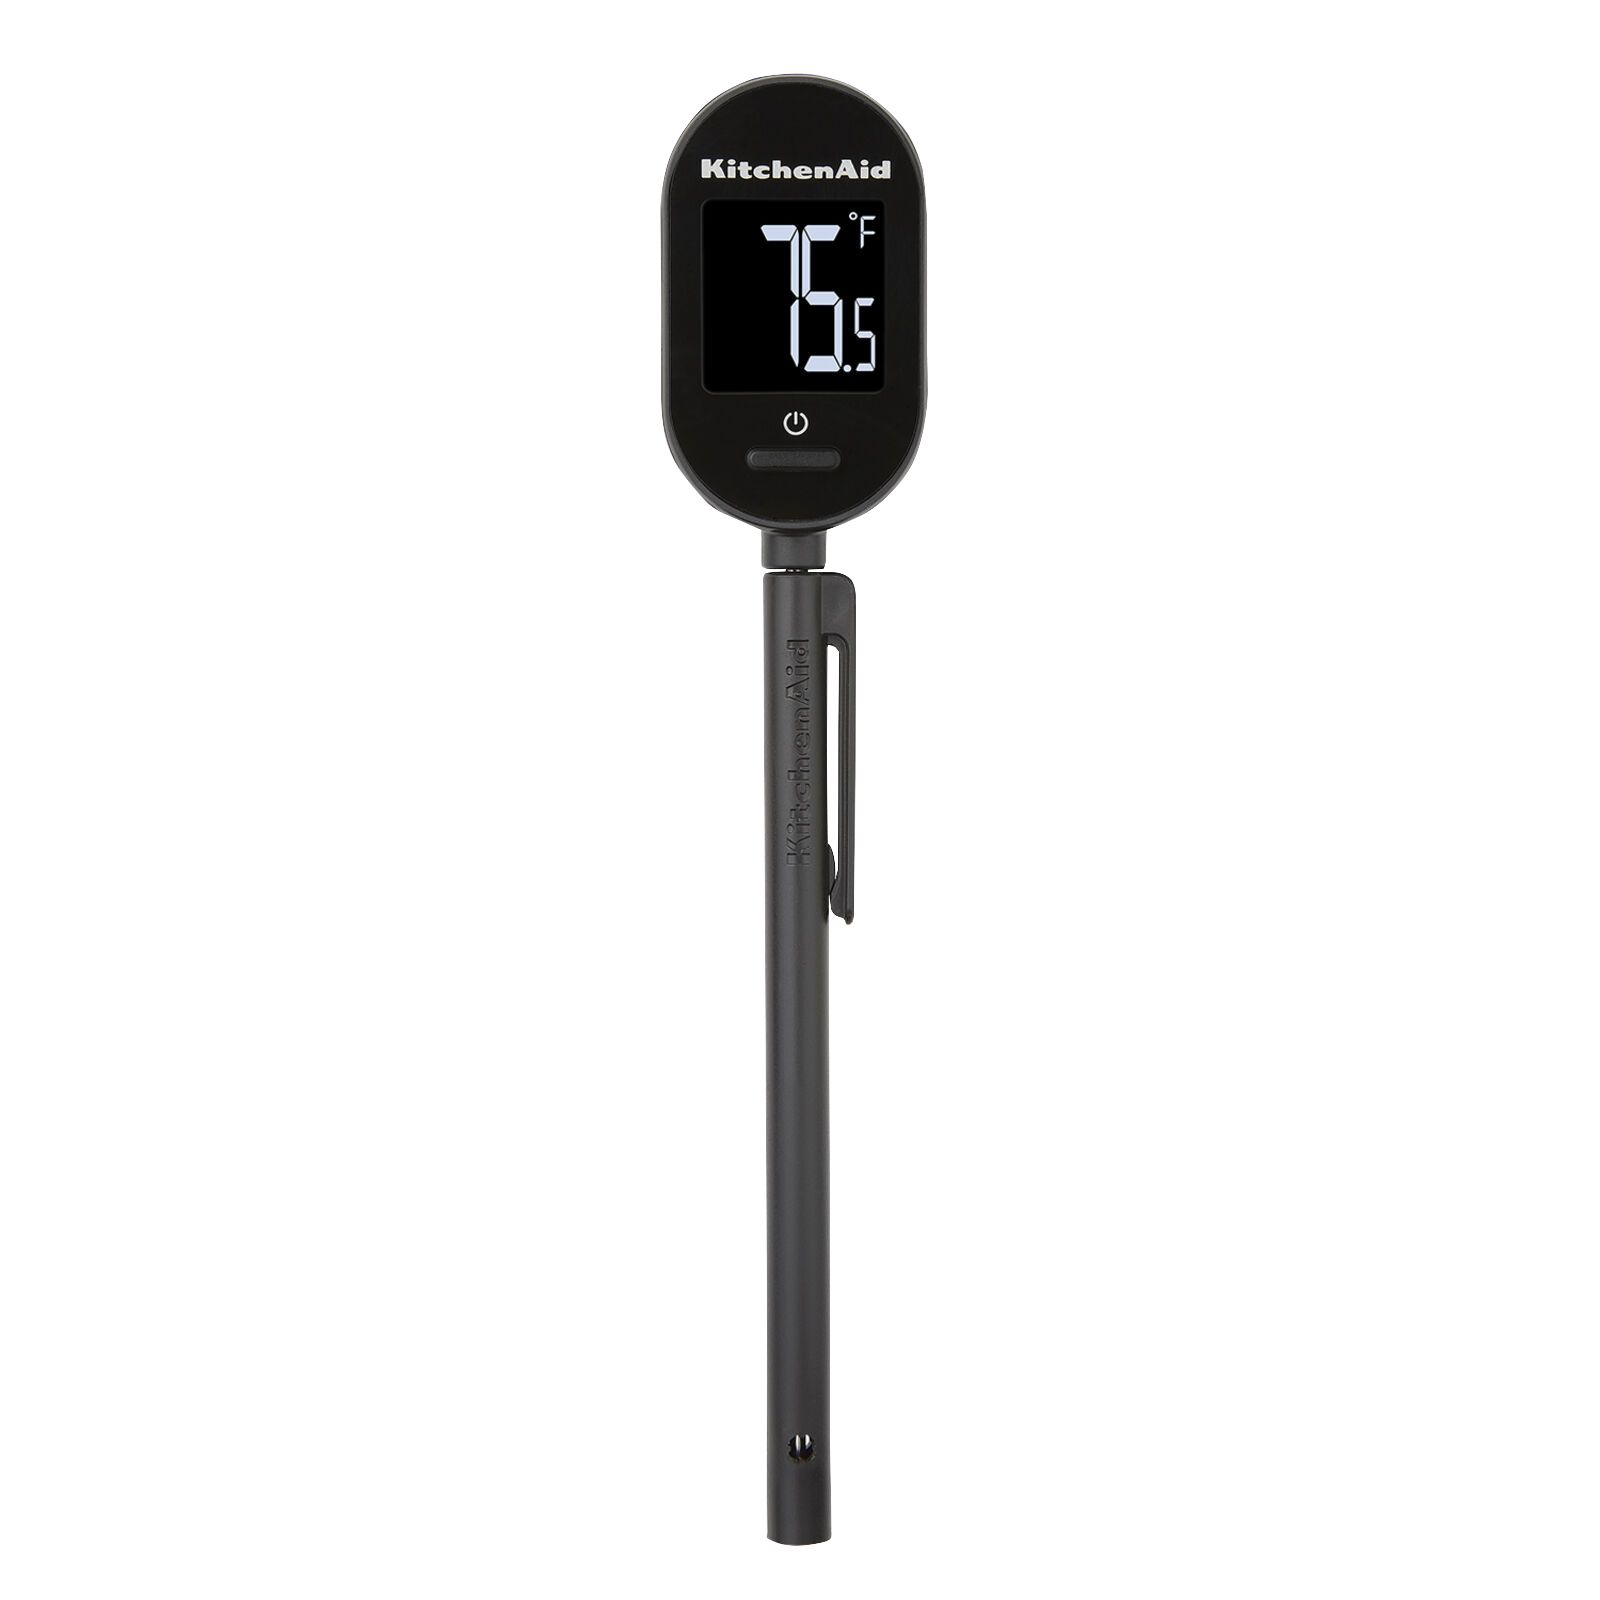 KitchenAid Instant Read Silicone Trim Thermometer, Color: Black - JCPenney